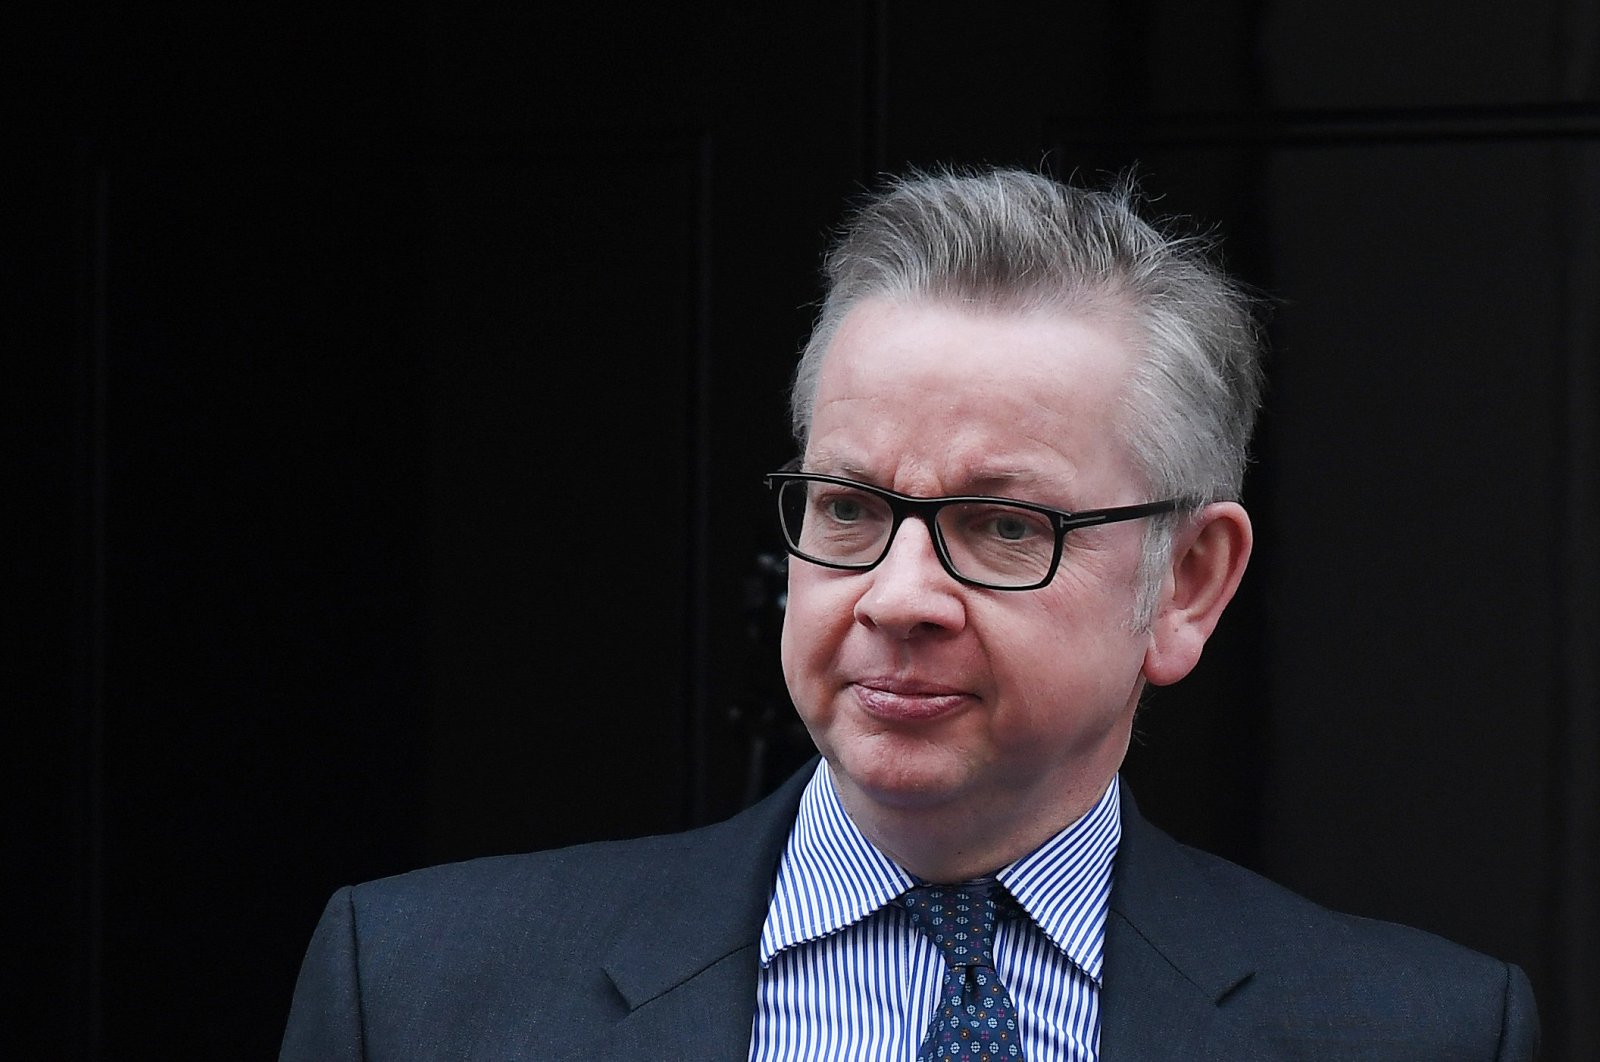 British Secretary of State for Environment, Michael Gove departs a Cabinet meeting at 10 Downing Street in London,  Britain, Nov. 28, 2017. (EPA Photo)